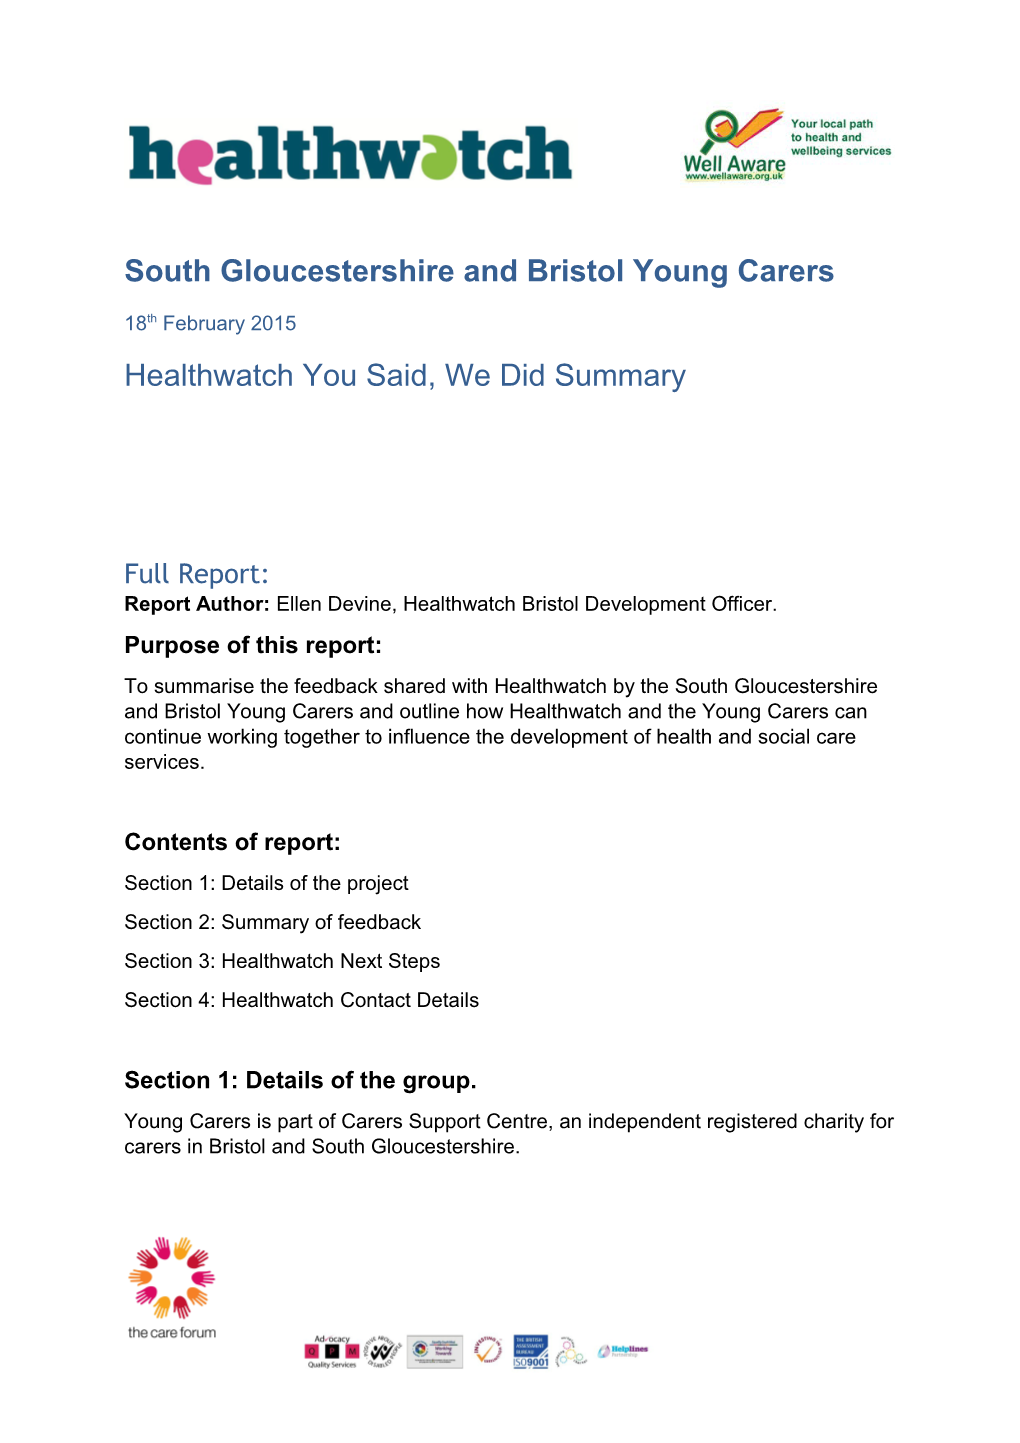 South Gloucestershire and Bristol Young Carers